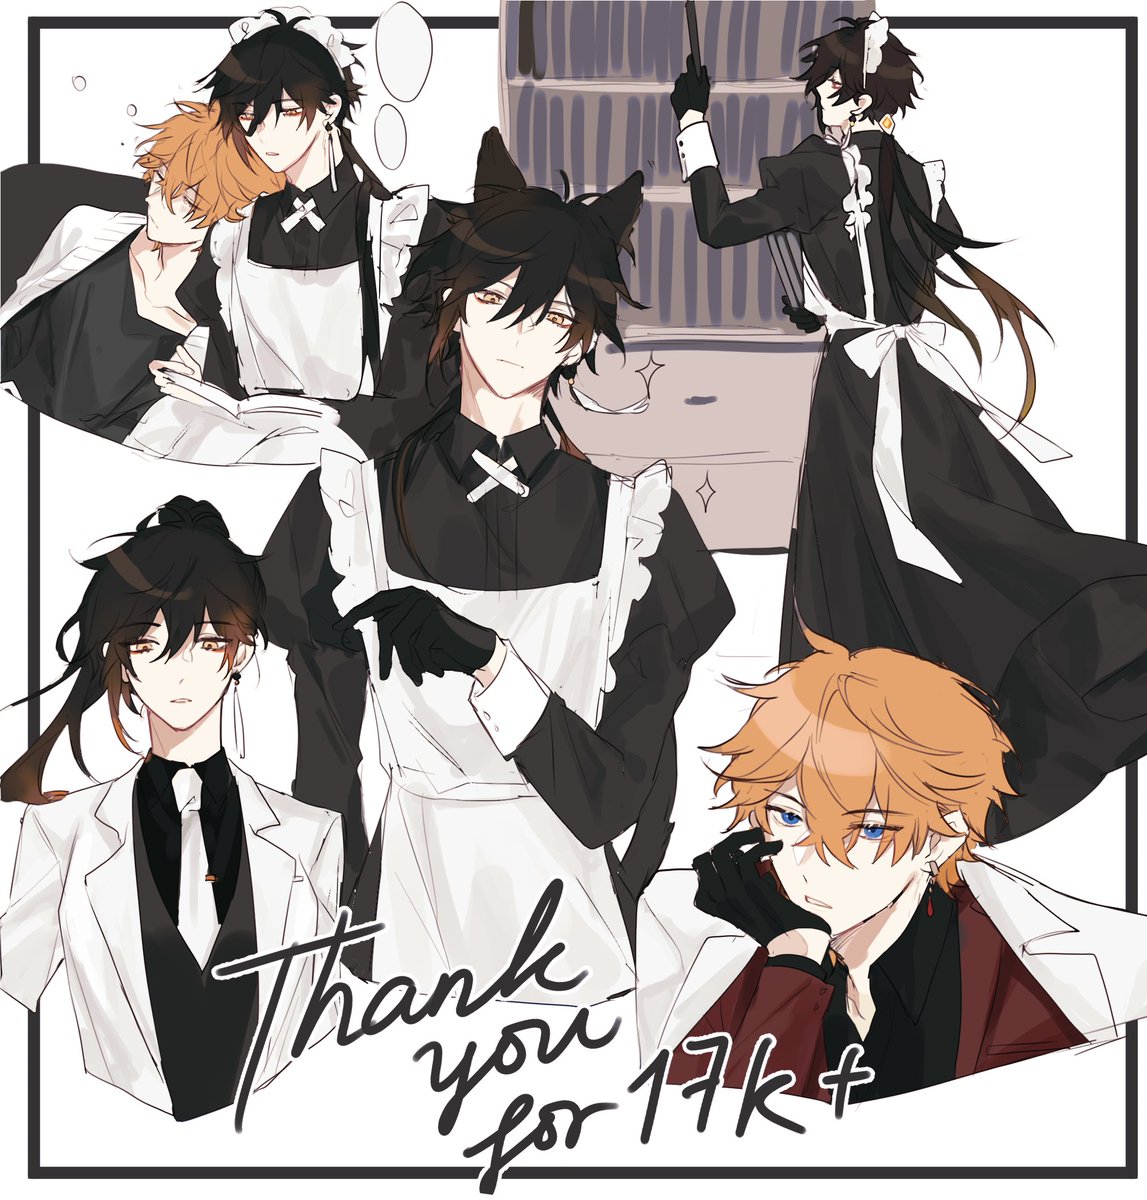 Bulter/Maid!Zhongli and Master!Childe ??
??Thank you so much for your support ?? 